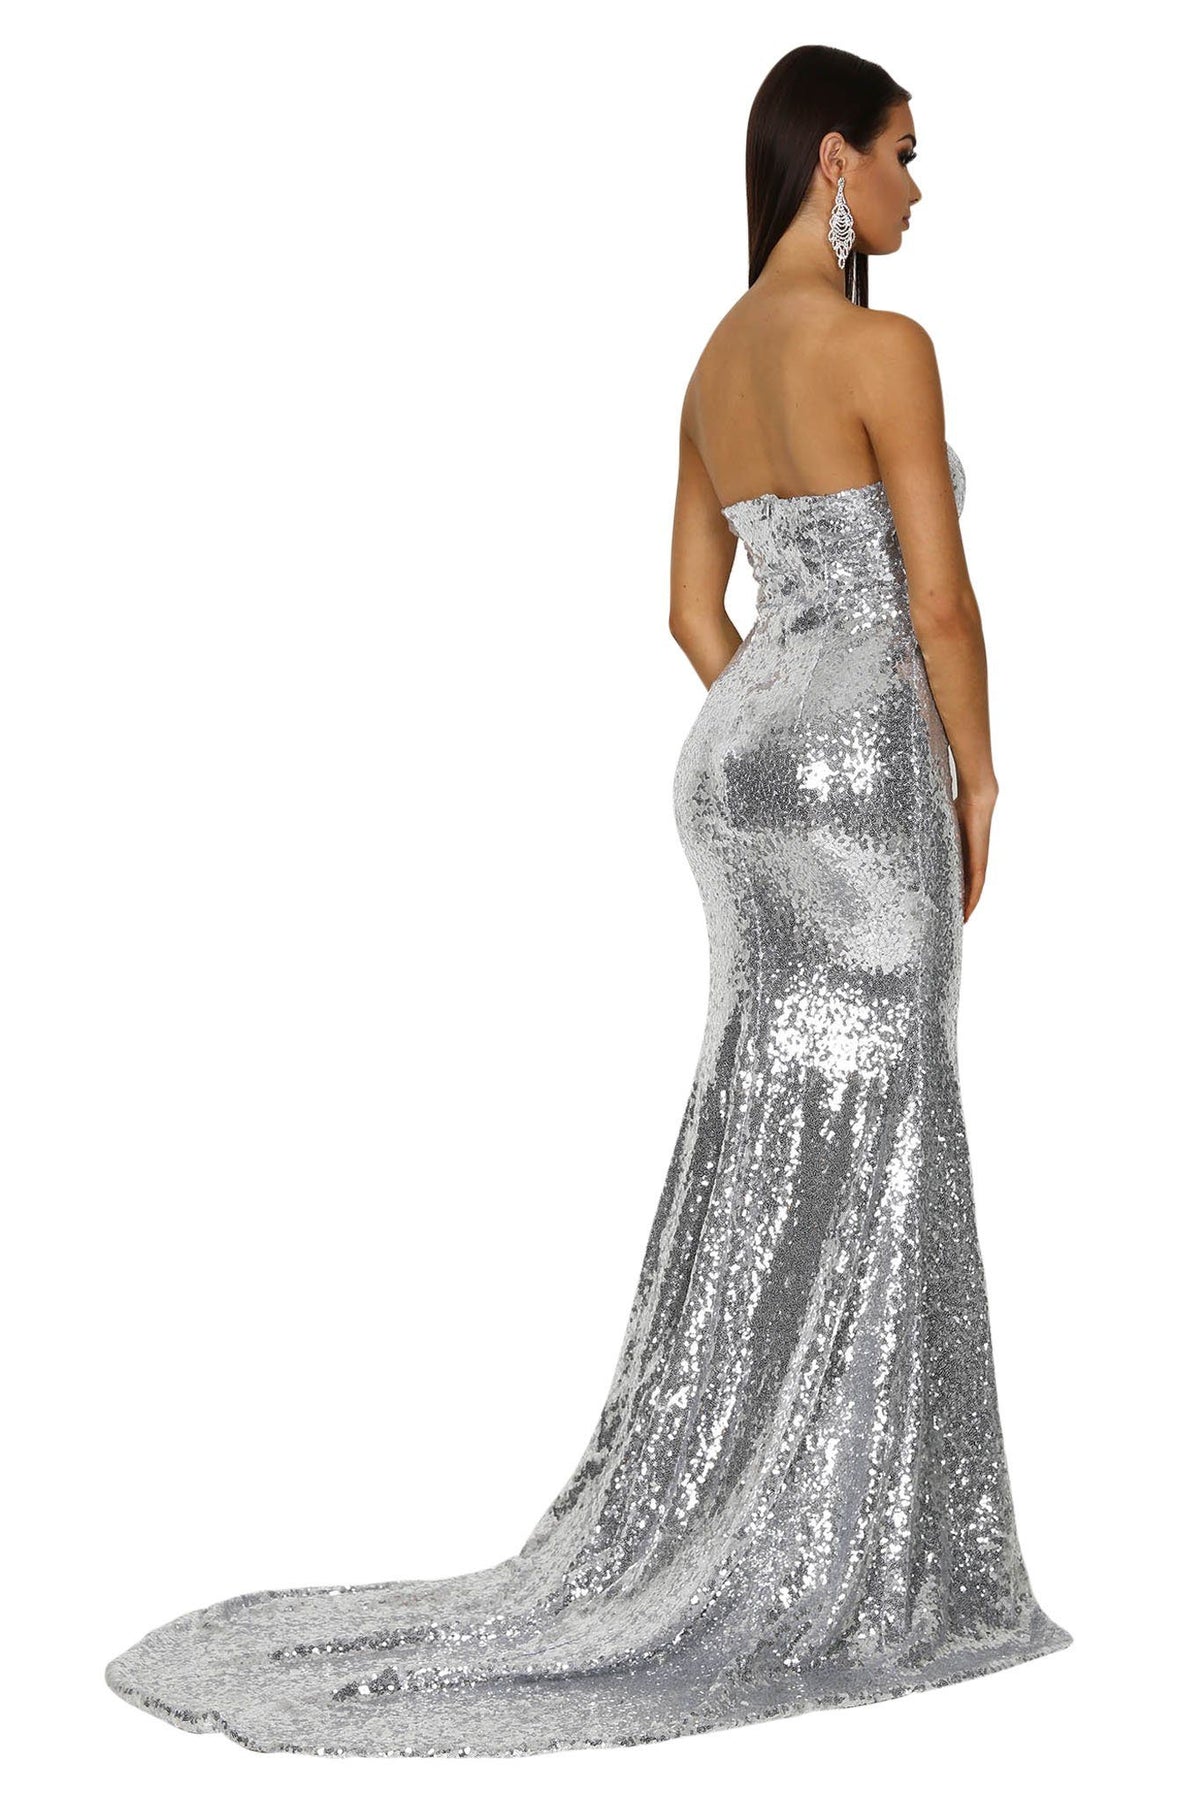 Back and long train of Silver sequin sleeveless formal evening long gown features strapless straight neckline, flared mermaid skirt and long train